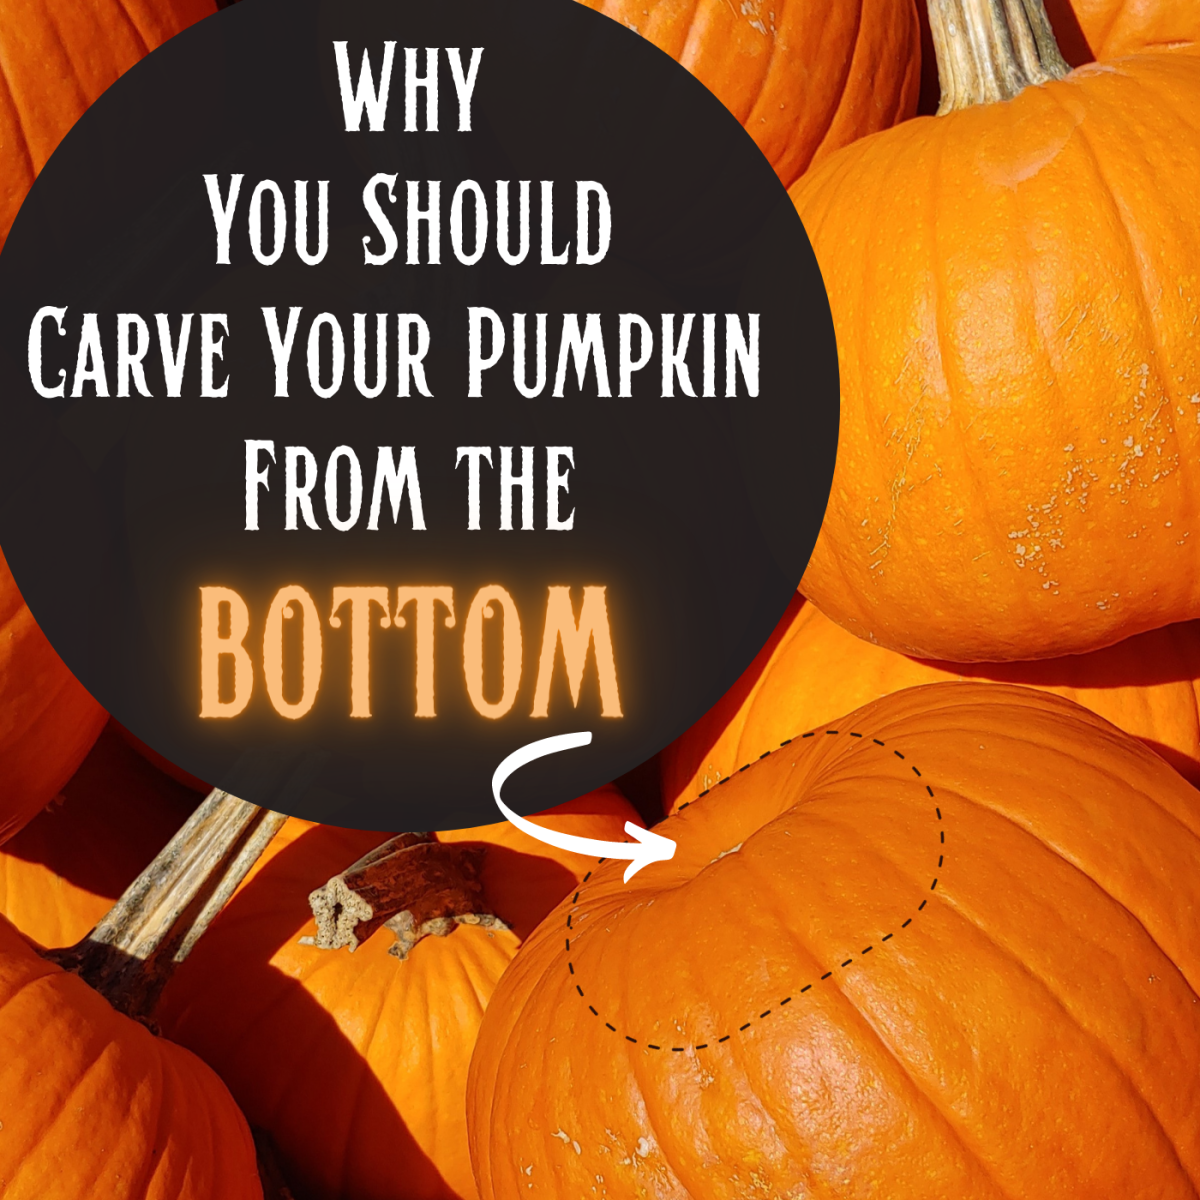 Here's an idea that may sound shocking: Carve your jack-o-lantern from the bottom rather than the top! Find out why this method works better.